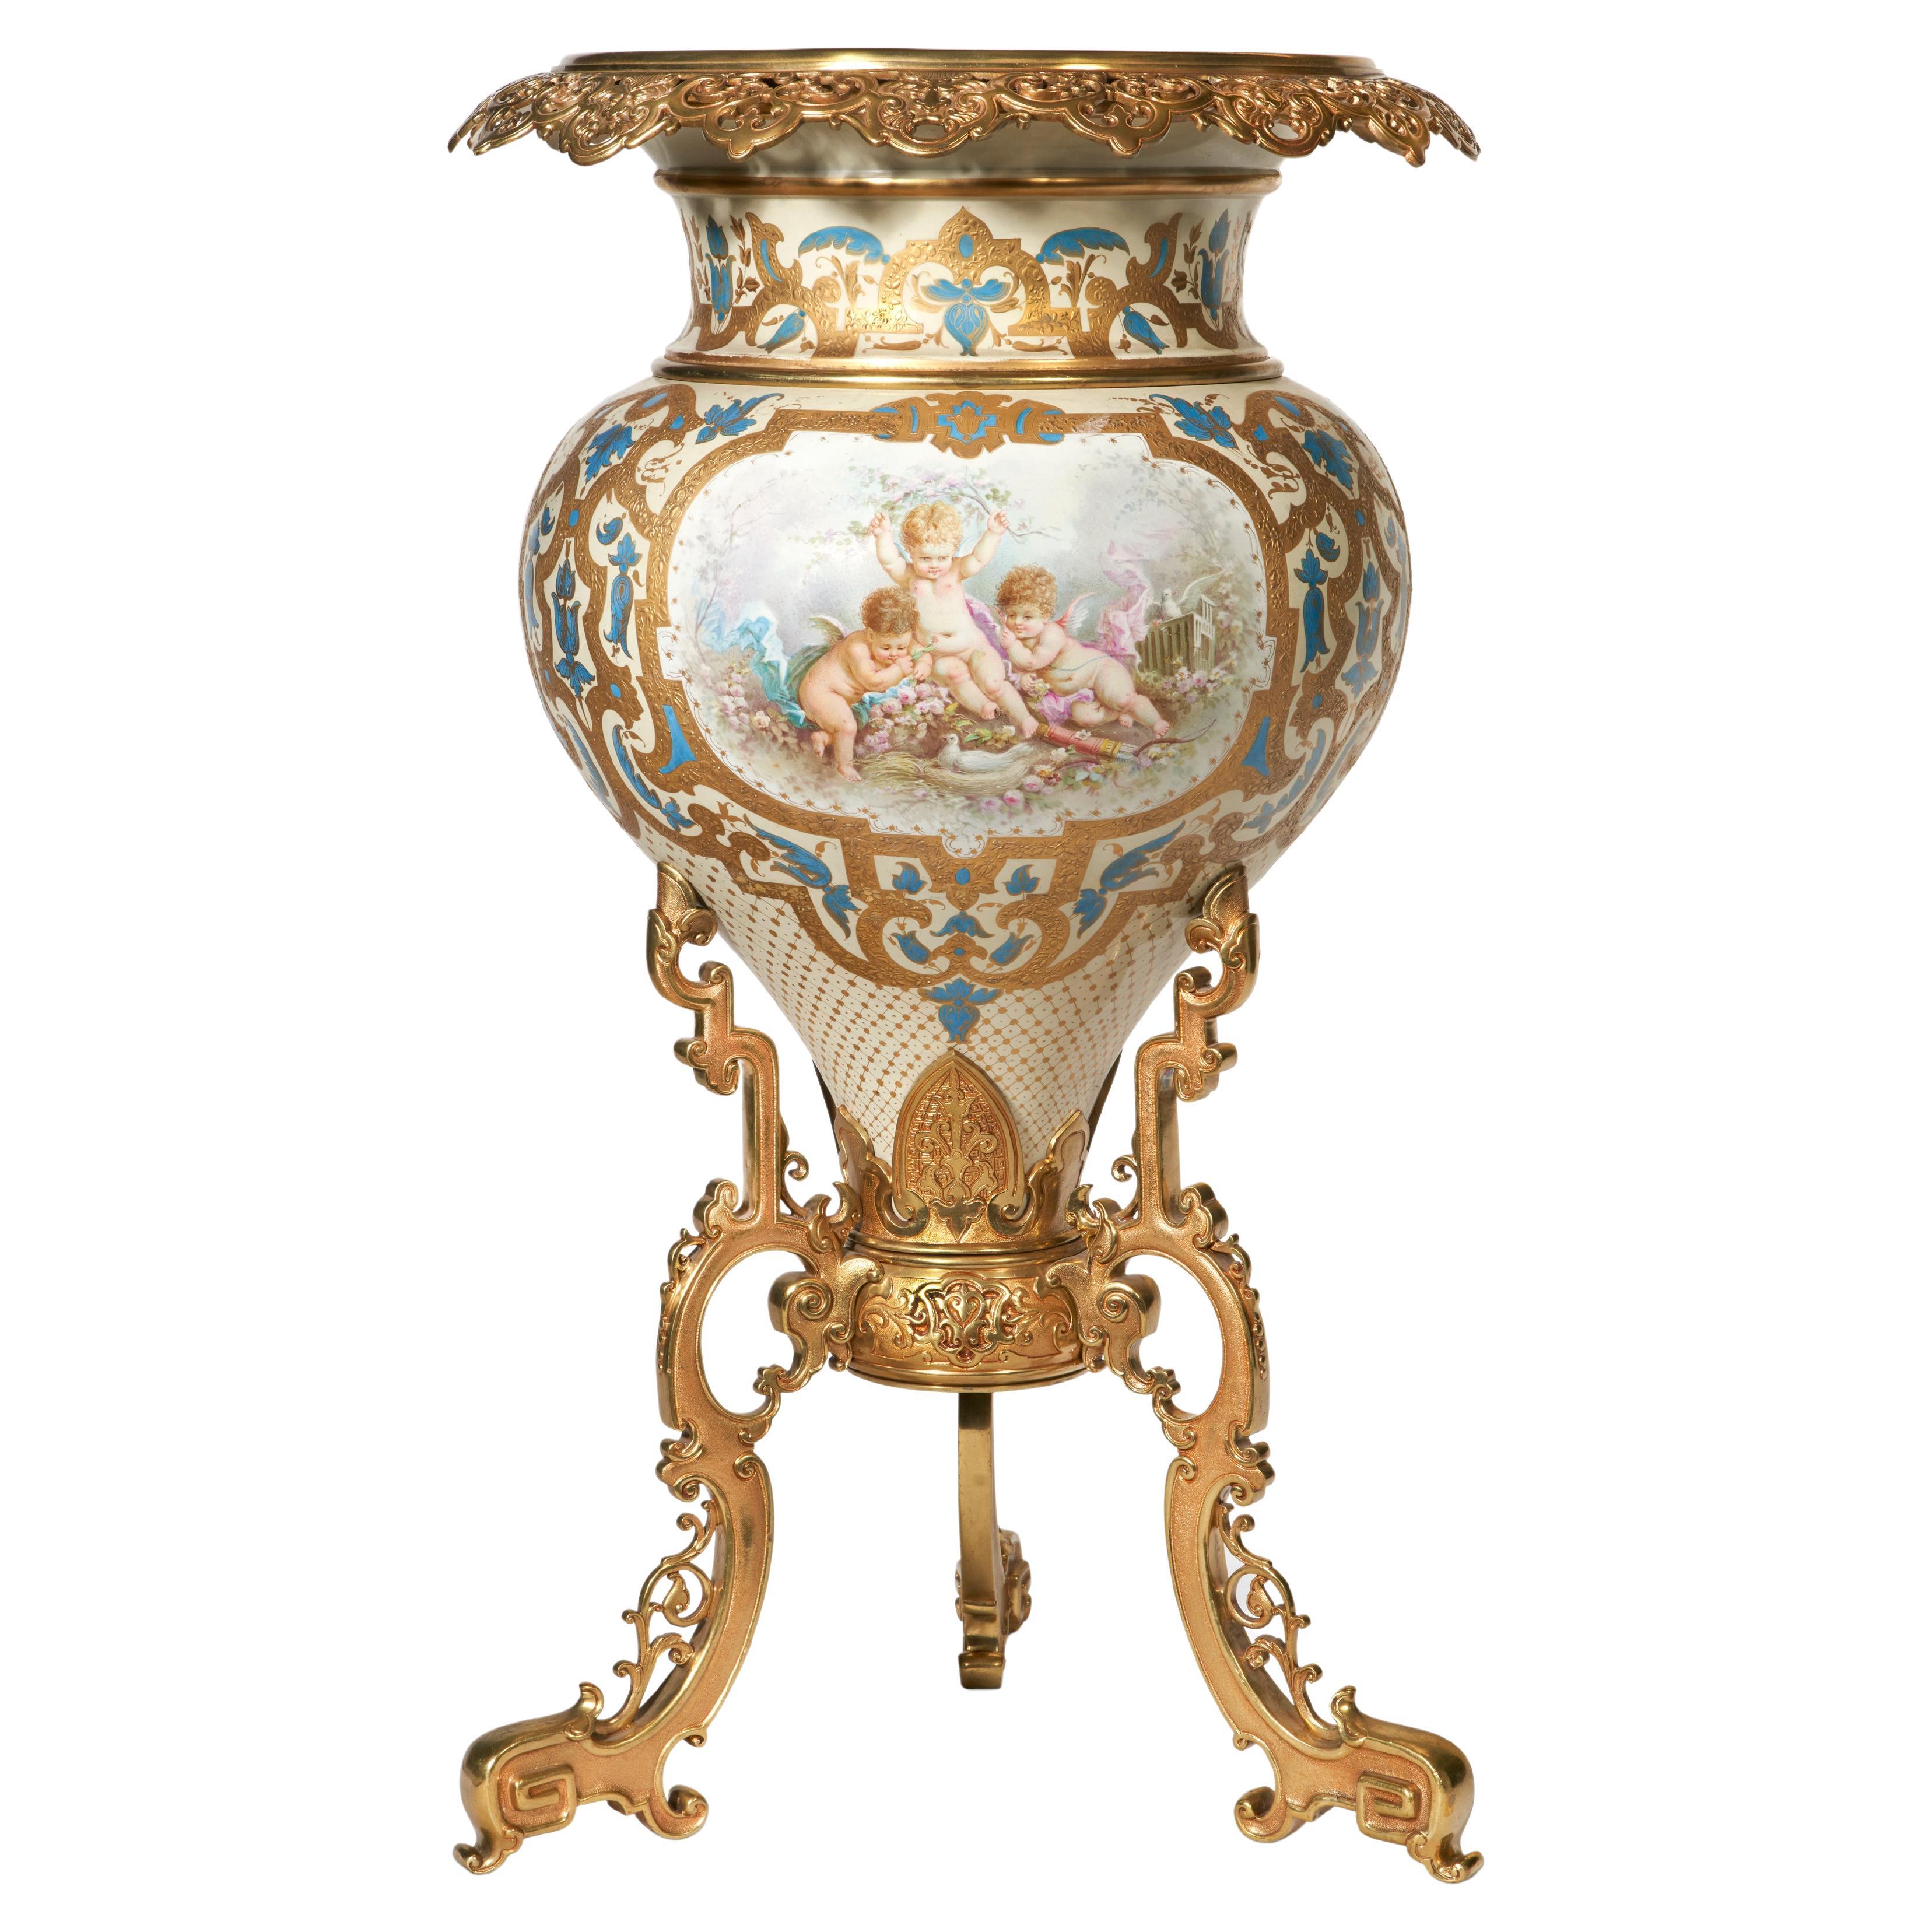 Large & Important French 19th C. Sevres Porcelain Ormolu Mounted Jardiniere